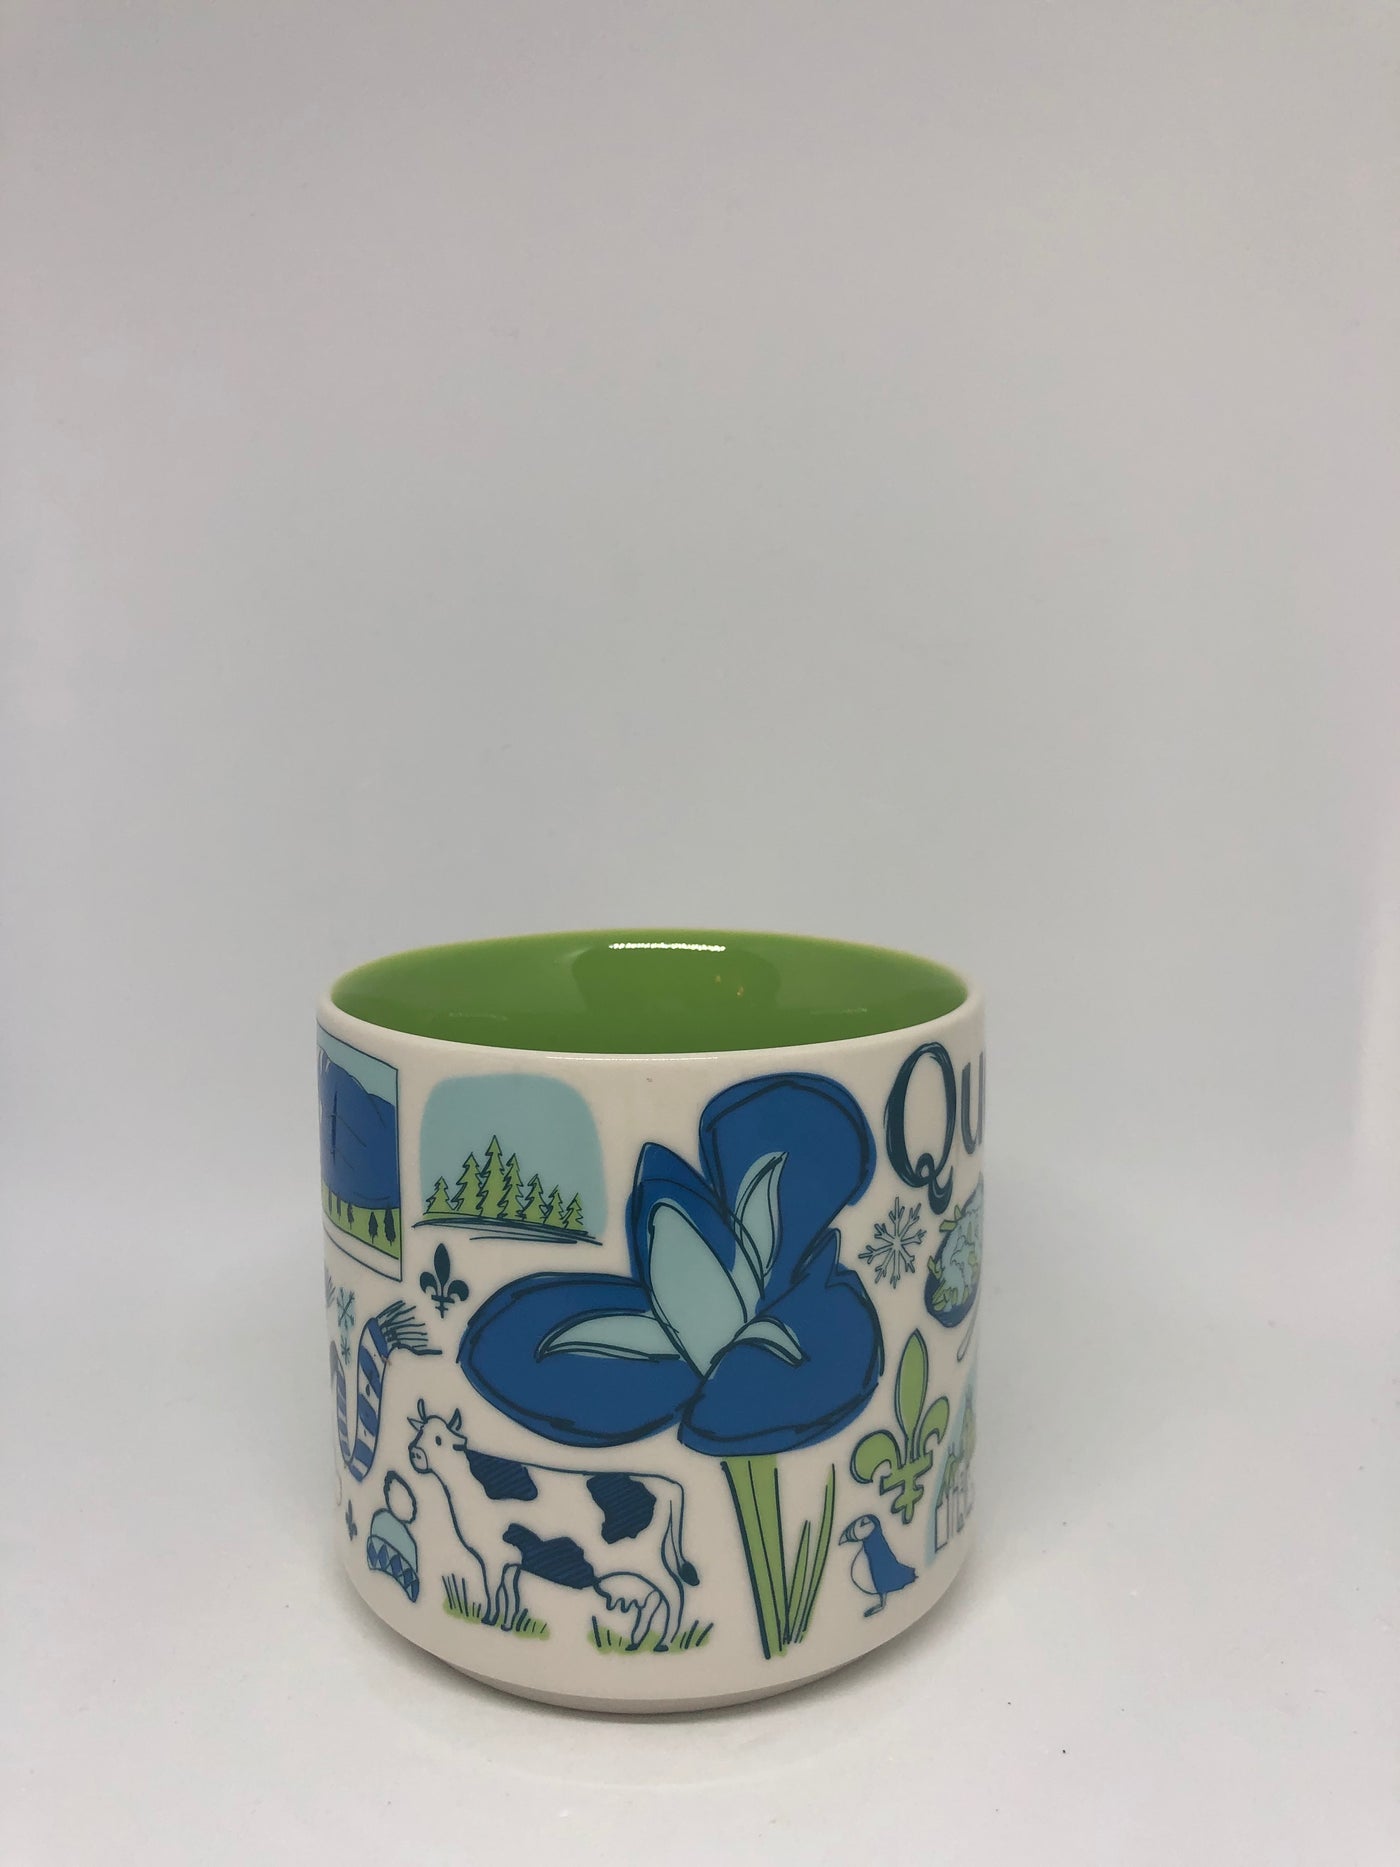 Starbucks Been There Series Collection Canada Quebec Coffee Mug New